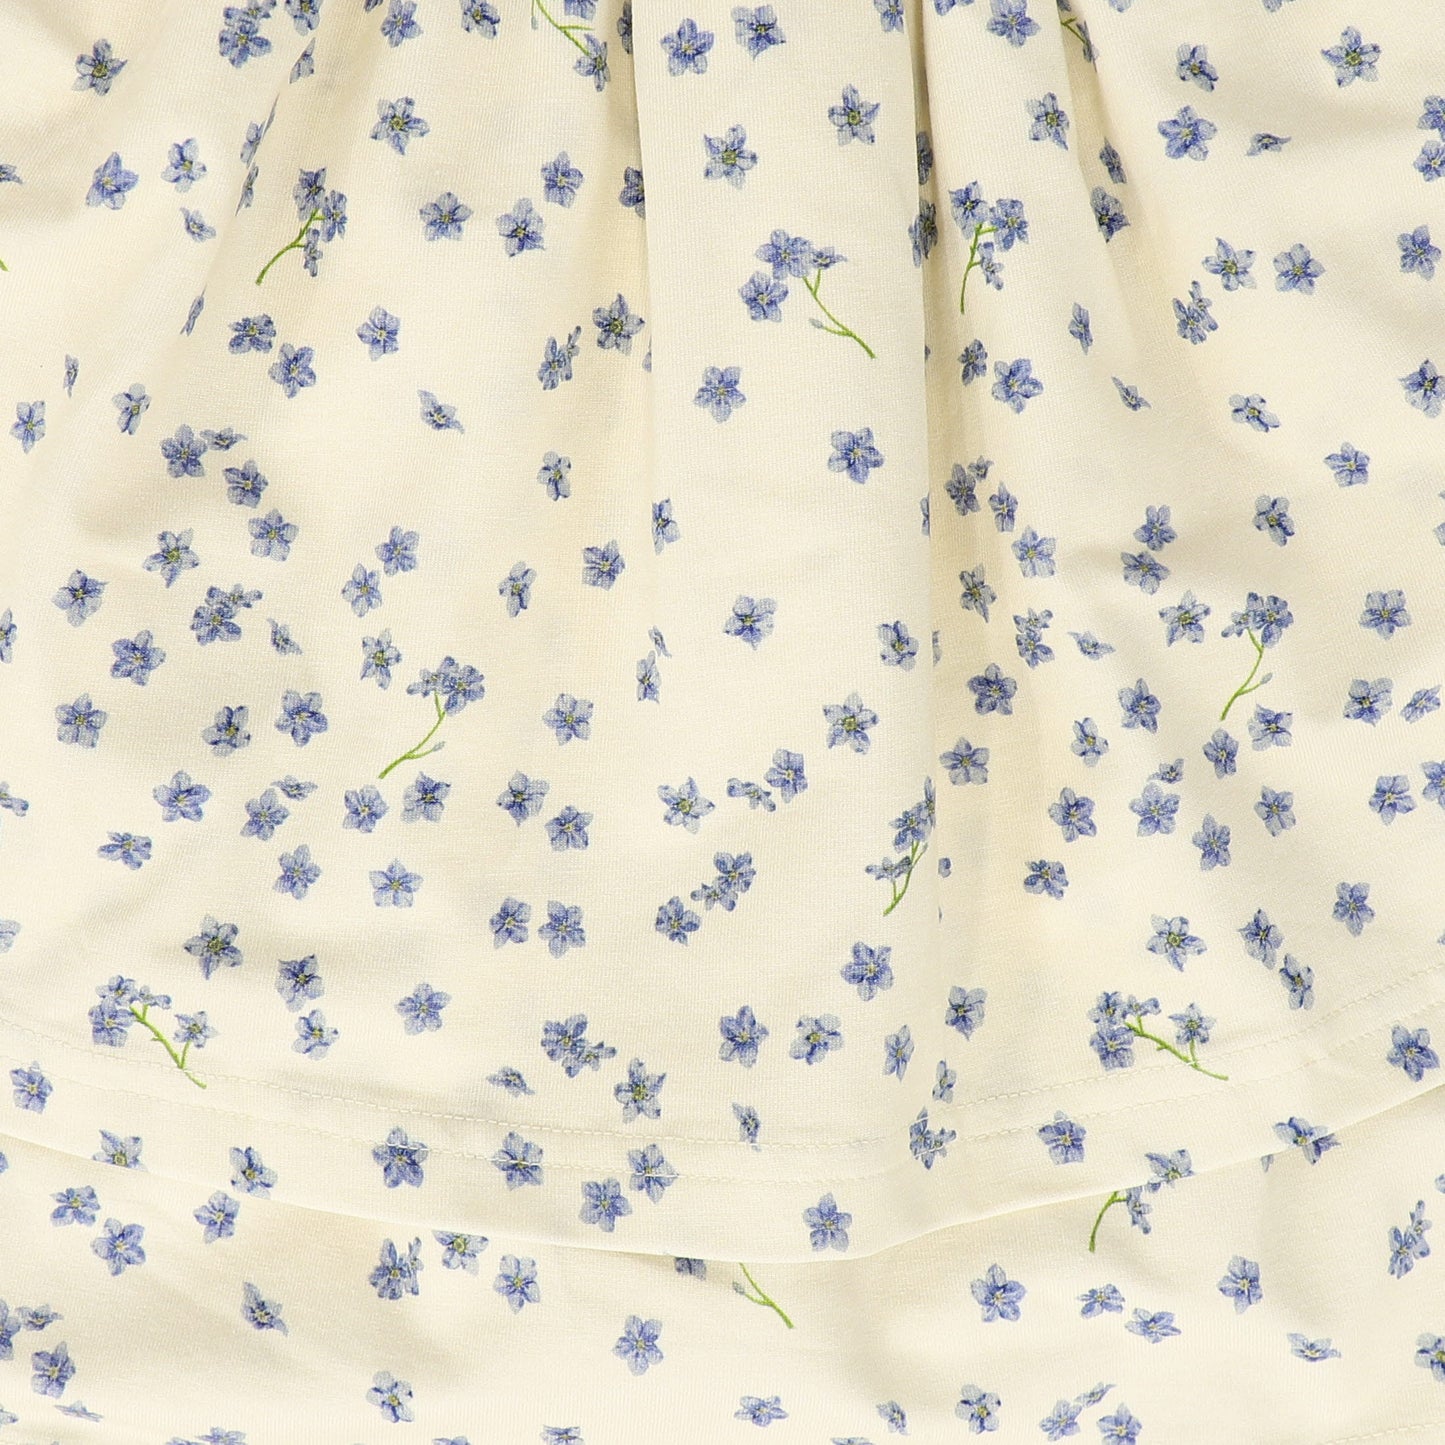 PETIT PIAO CREAM/BLUE FLORAL PRINTED SKIRT